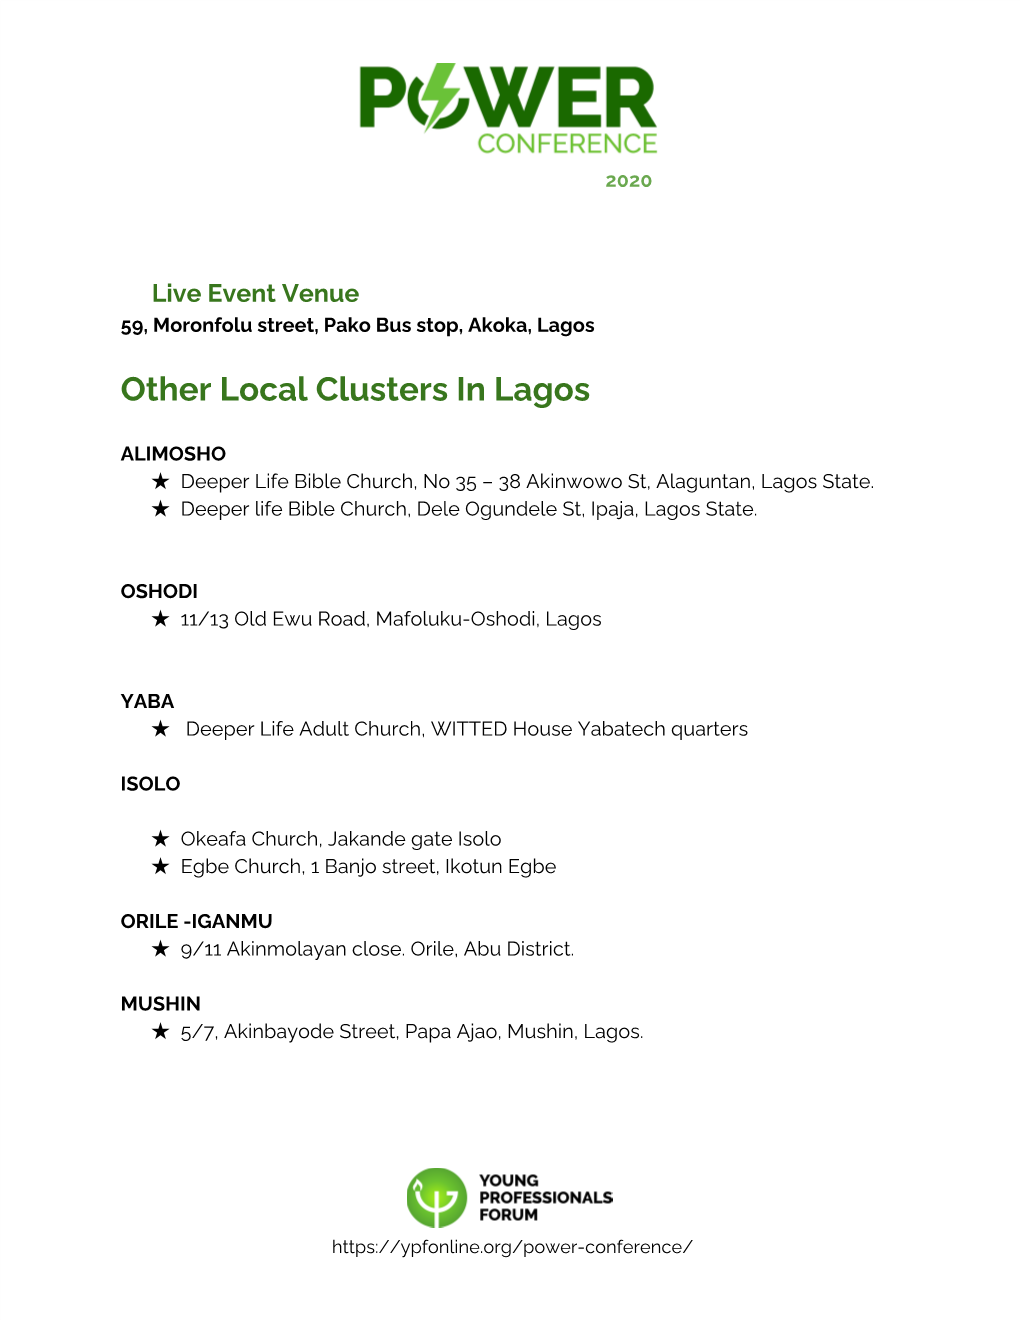 Other Local Clusters in Lagos